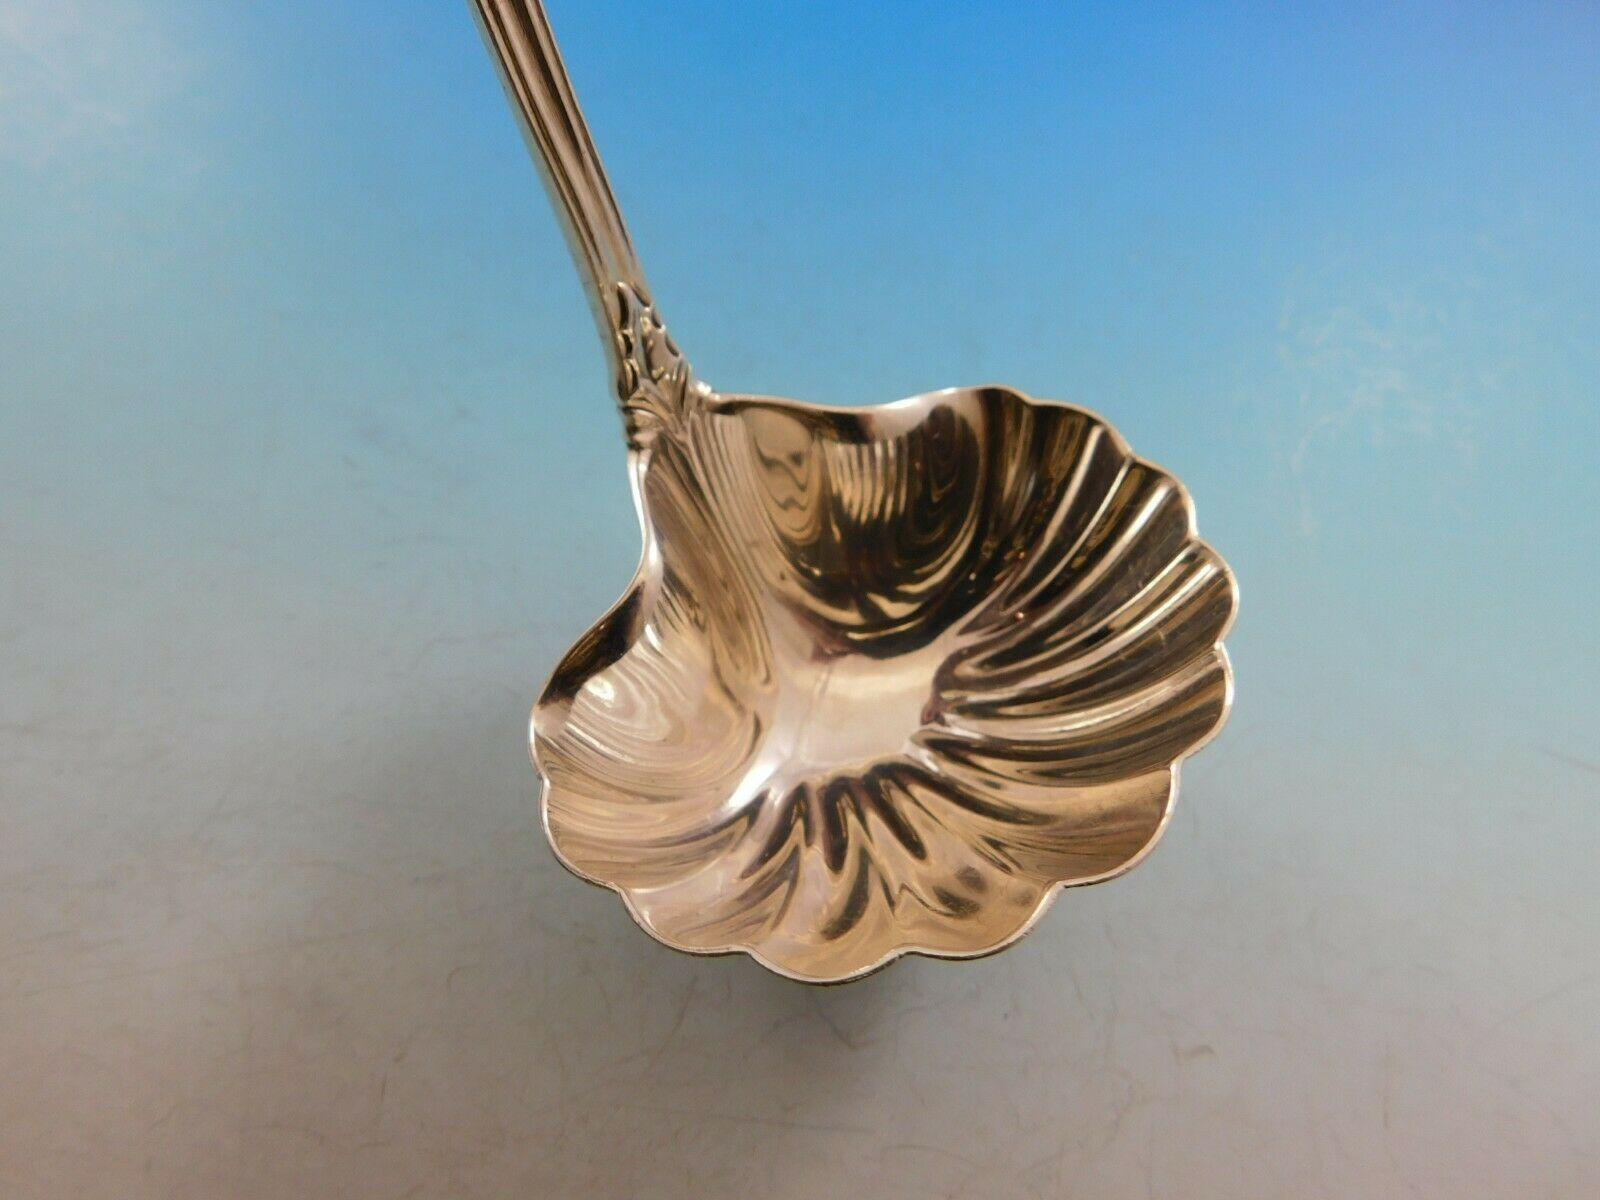 Exquisite sterling silver sauce ladle measuring 6 1/4